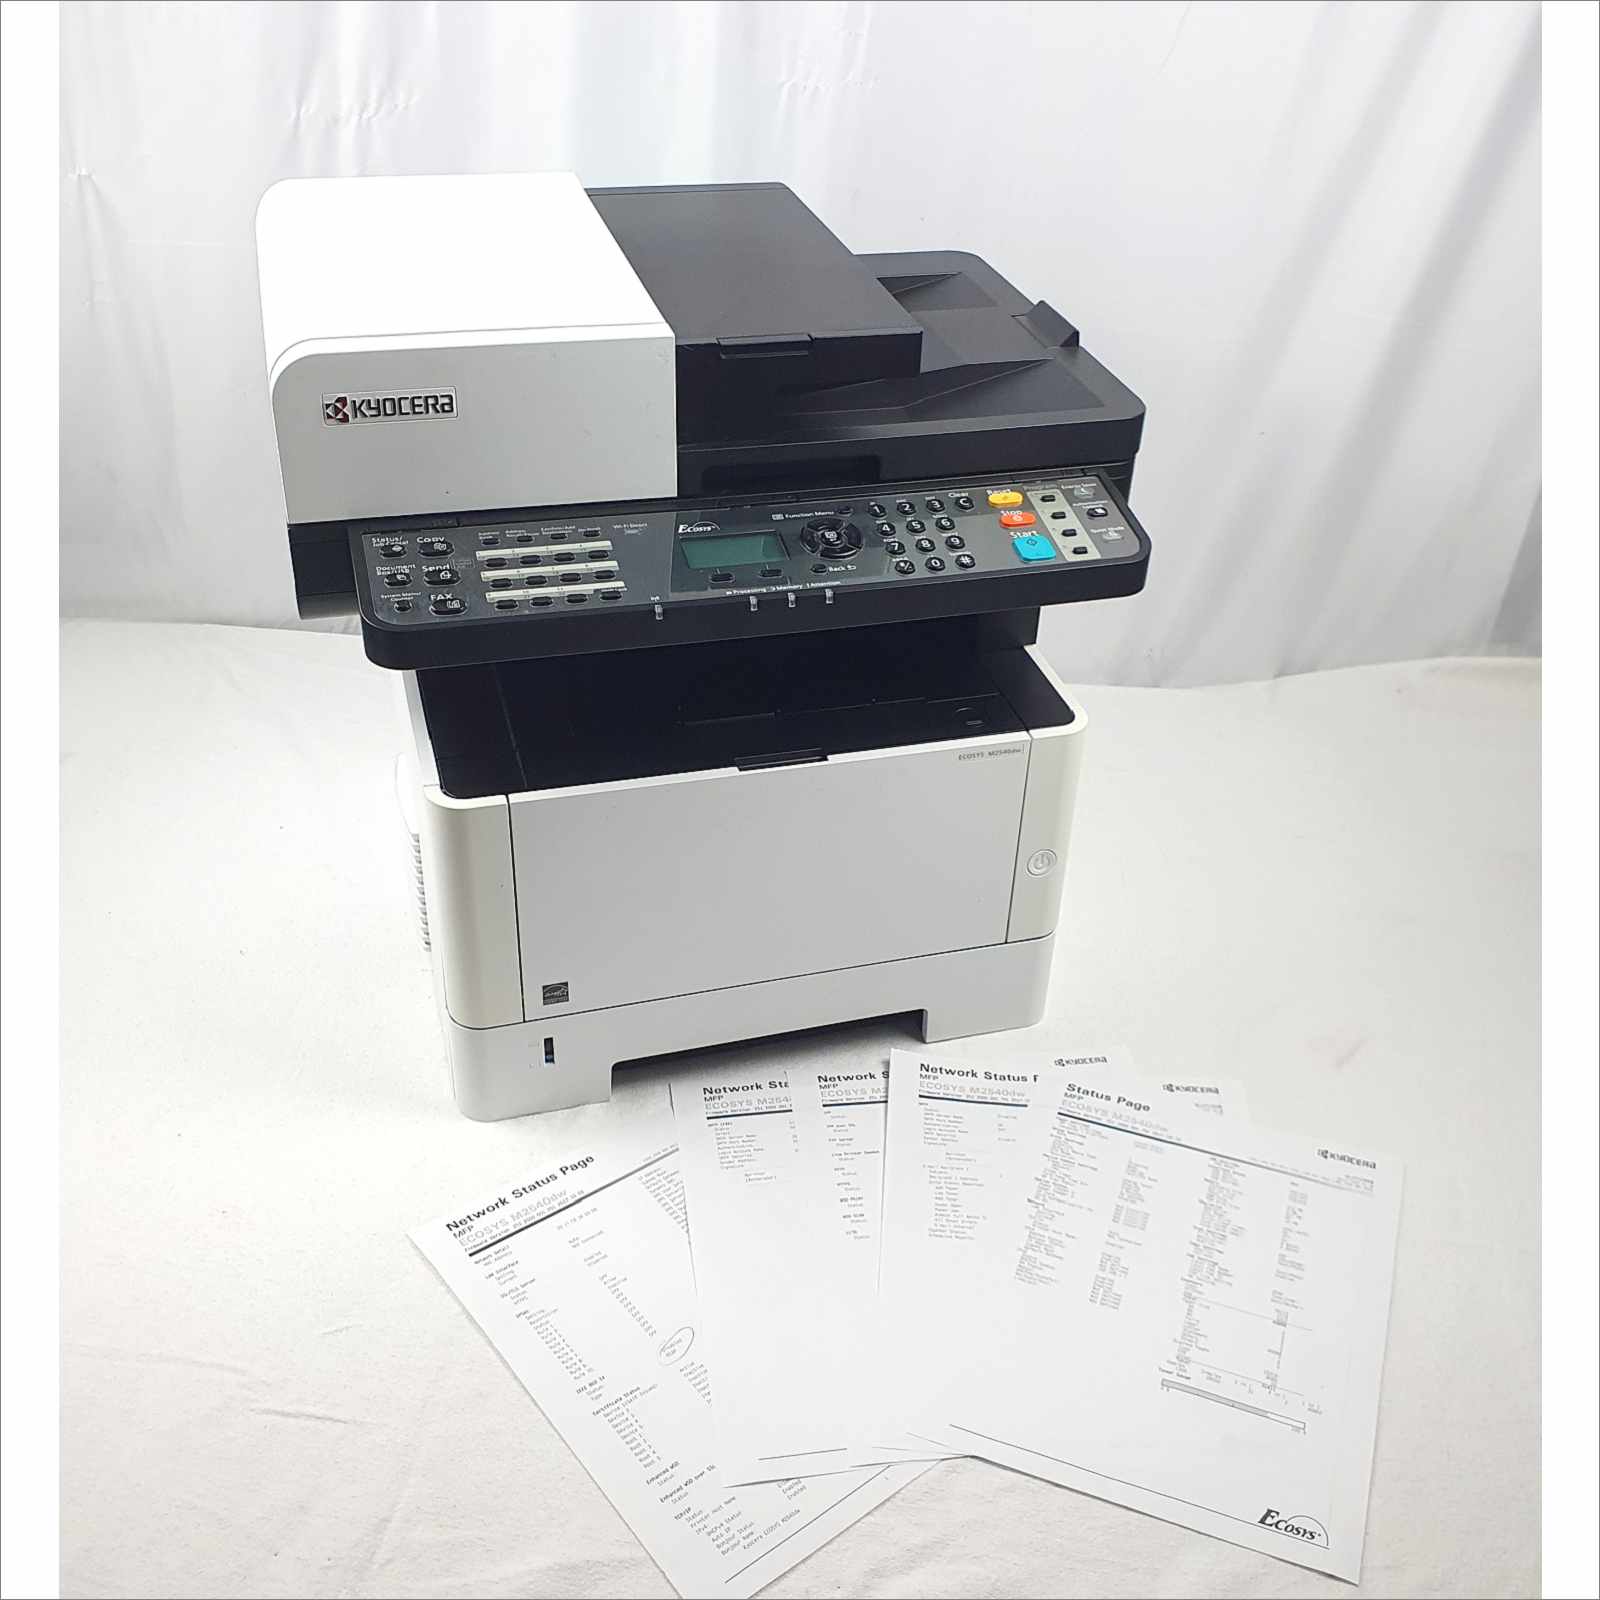 viool Editie Stiptheid Kyocera Ecosys M2540dw Black & White Workgroup Duplex Scanner Fax all in  one Laser Jet Printer 40ppm 1200DPI Page Count 40K - Computer | Network |  Telecom | Lab & medical Equipment